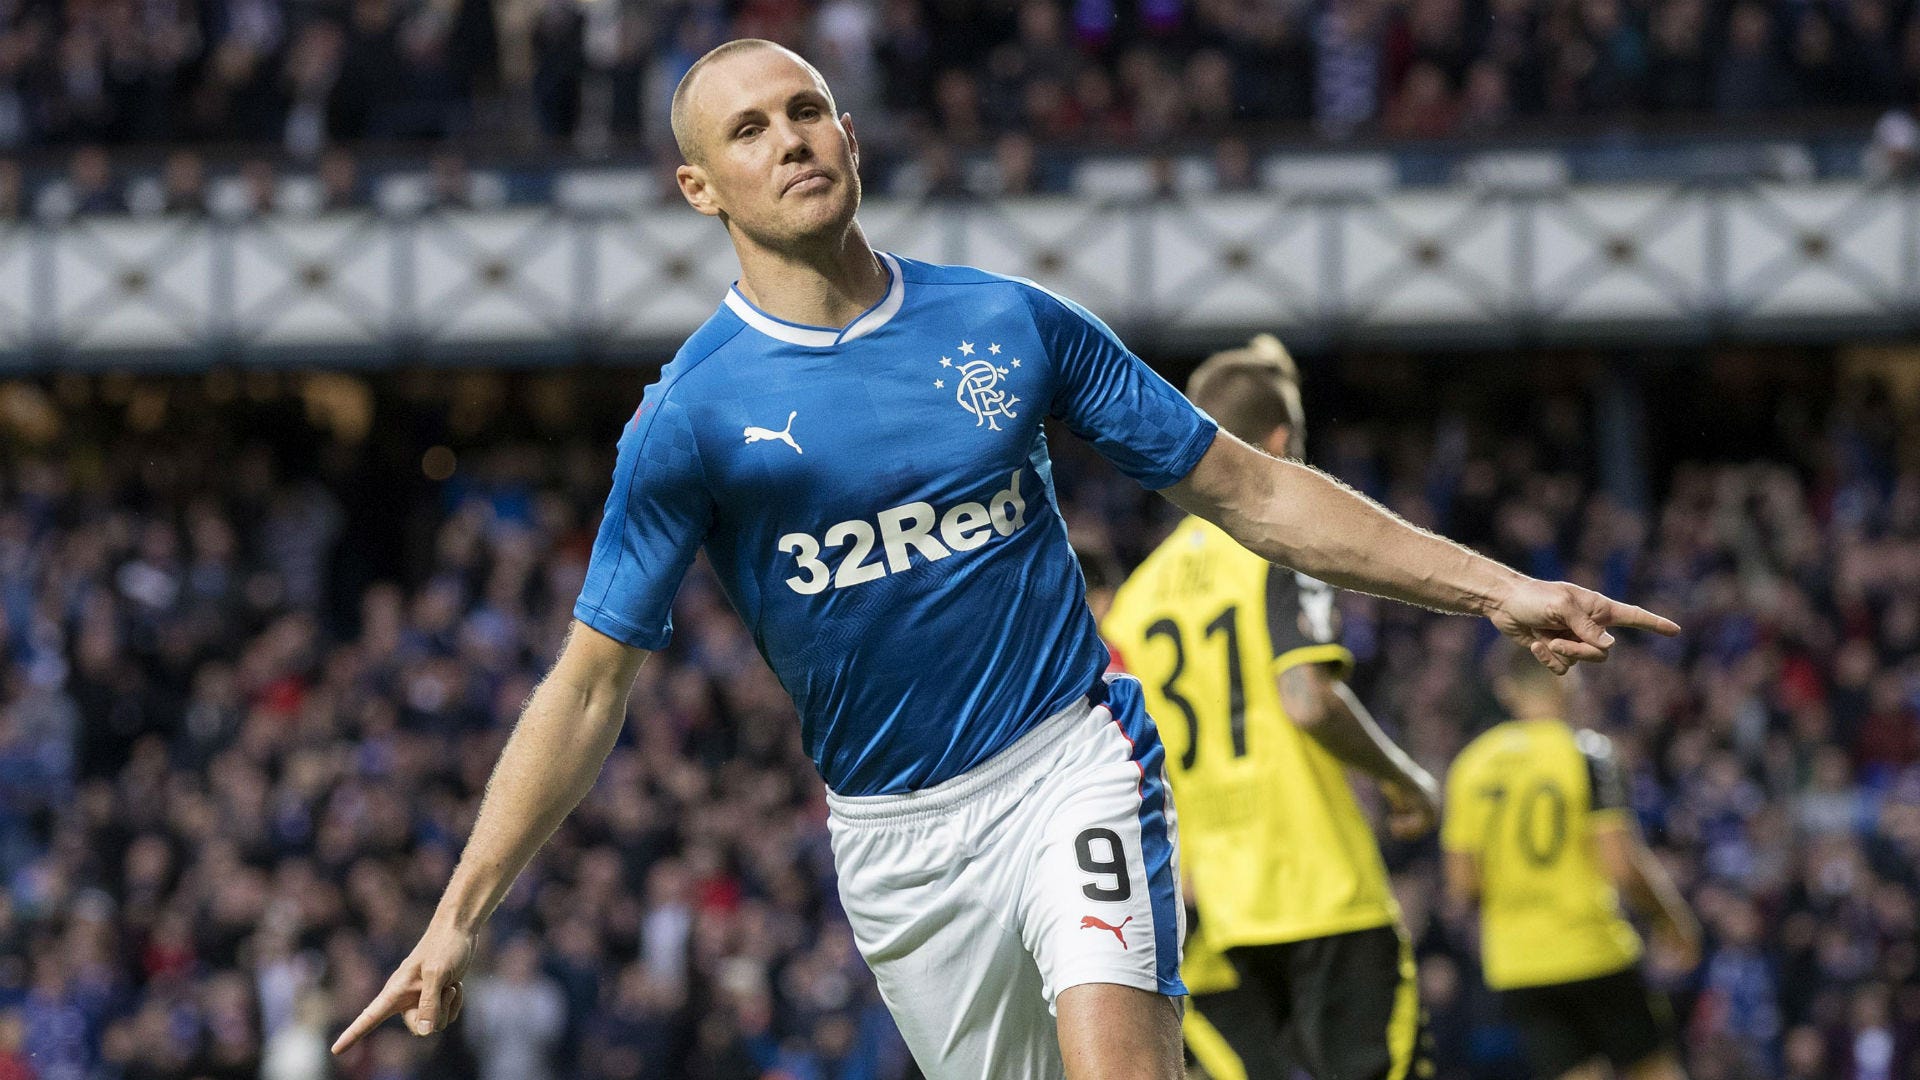 Progres Niederkorn vs Rangers TV channel, free stream, kick-off time, odds and match preview Goal English Bahrain